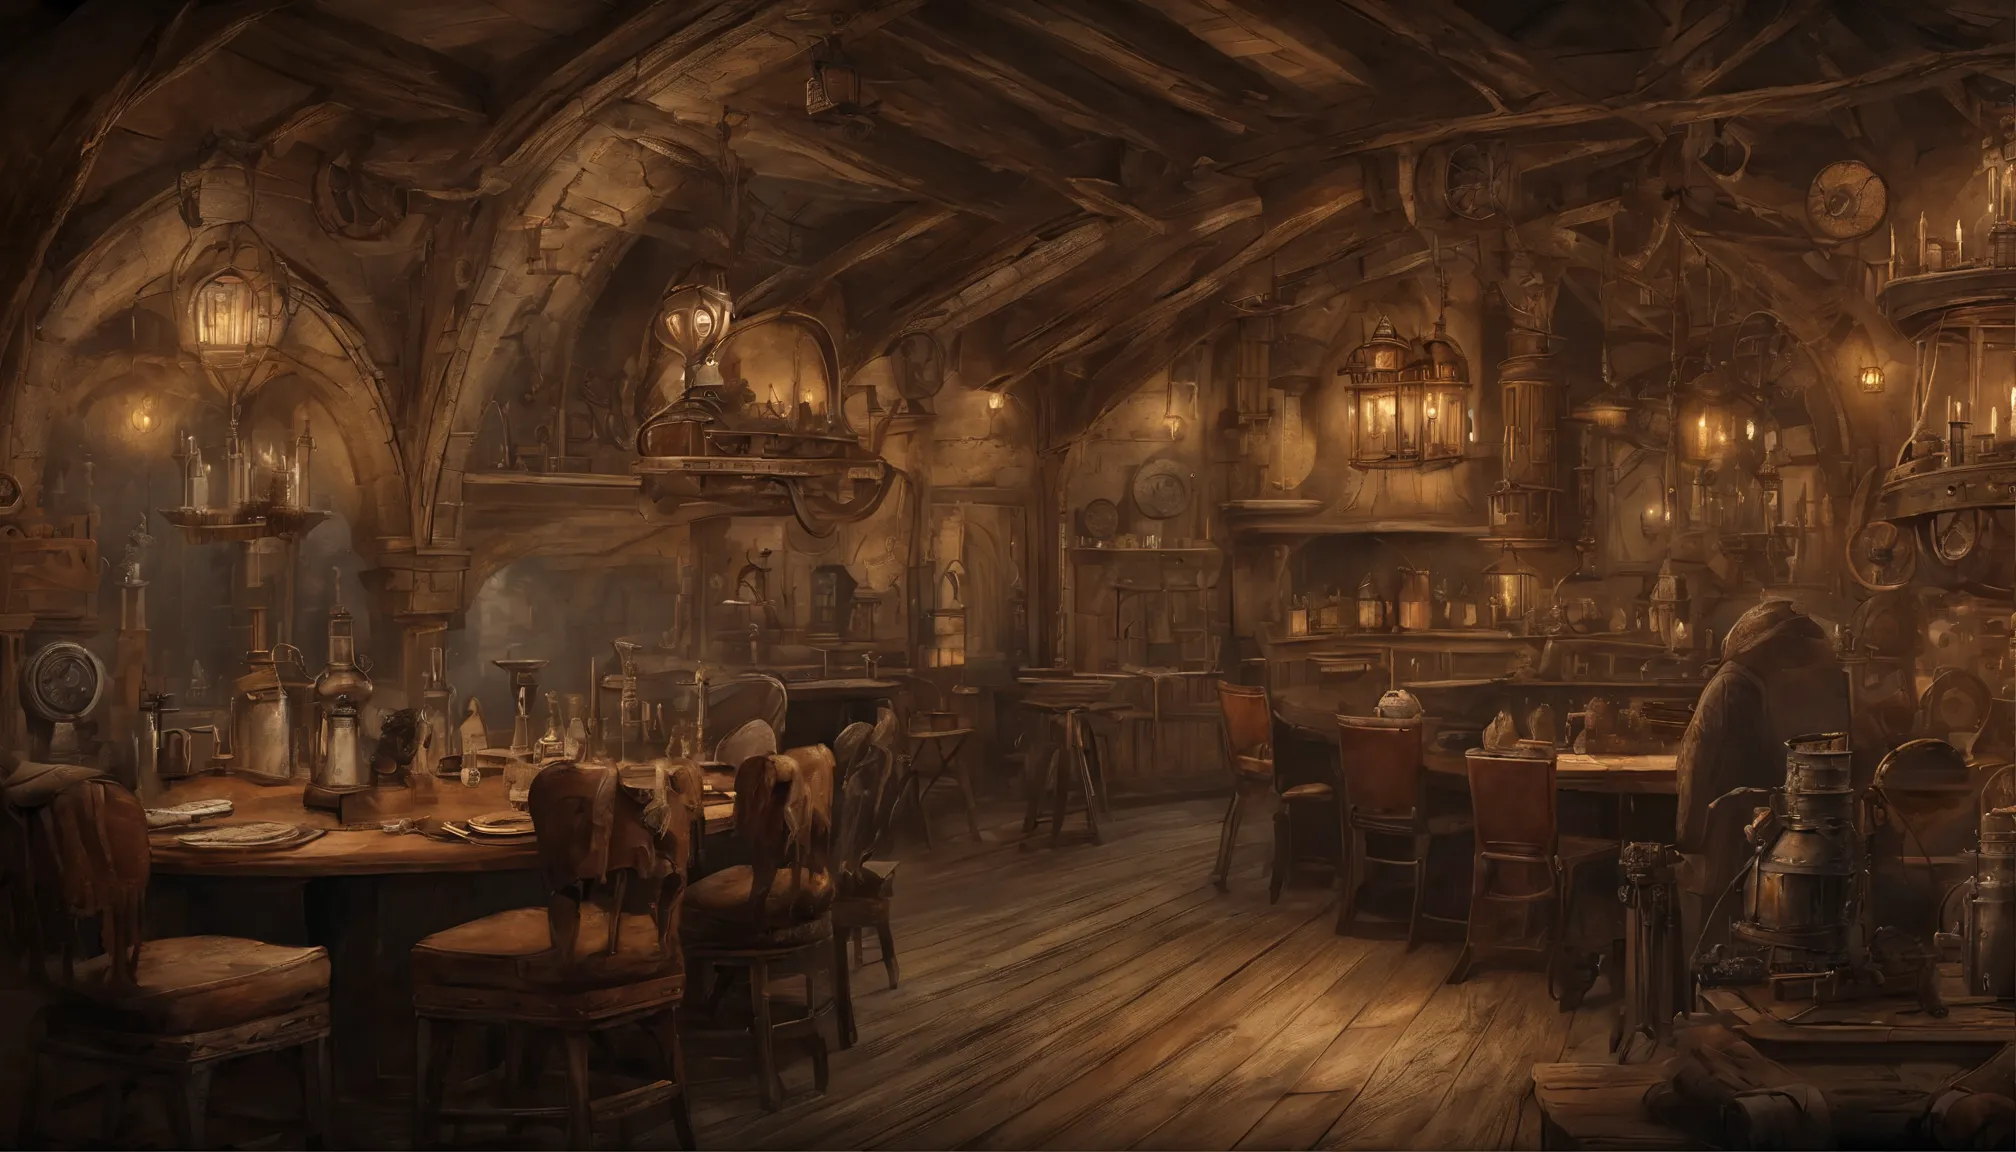 high fantasy, A crowded inn with a restaurant, Medieval background